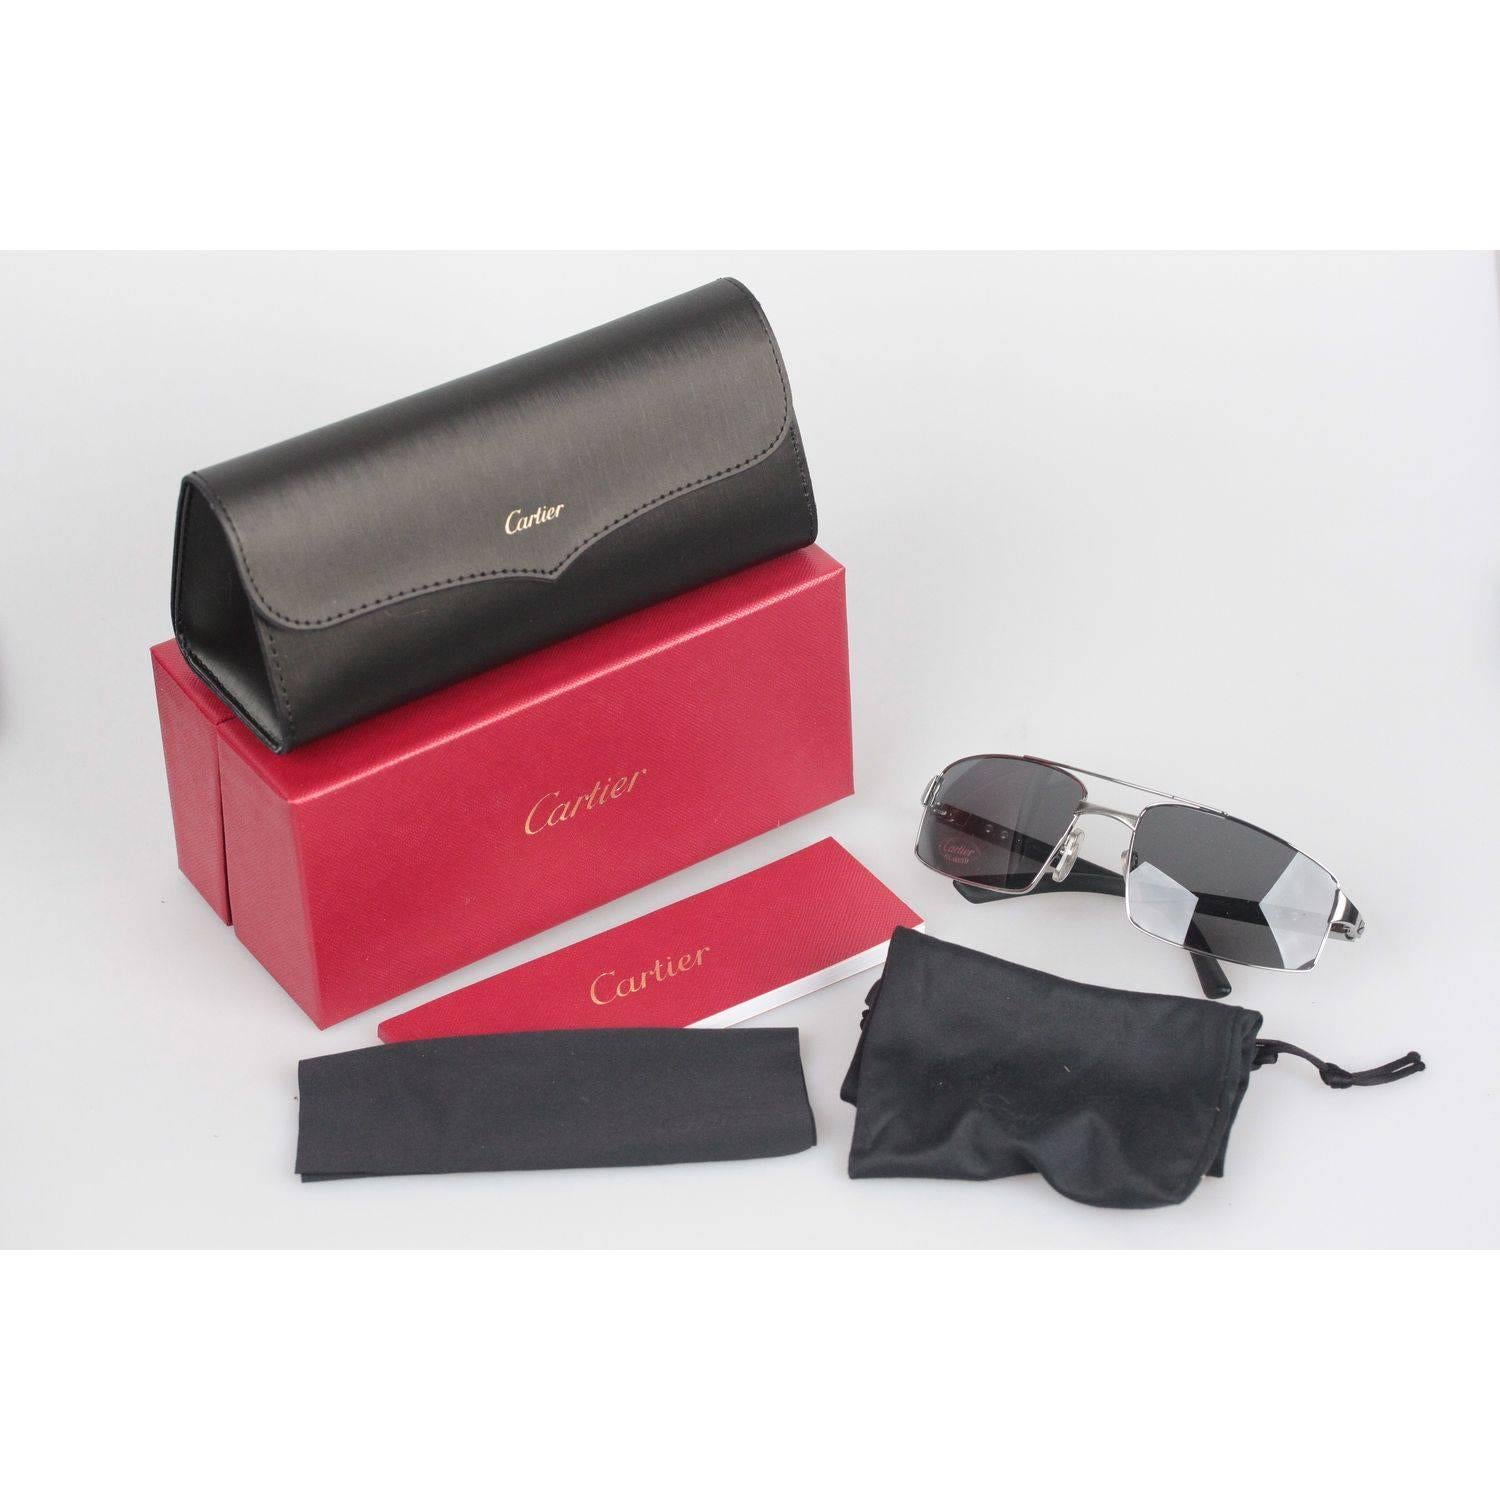 Platinum Brushed Sporty wrap Sunglasses by CARTIER
POLARIZED Gray lens
Soft Rubber on arms

Measurements:
- TEMPLE MAX. LENGTH: 120 mm
- TEMPLE TO TEMPLE - MAX WIDTH: 120 mm
- EYE / LENS MAX. WIDTH: 59 mm
- EYE / LENS MAX. HEIGHT: 38 mm
- BRIDGE